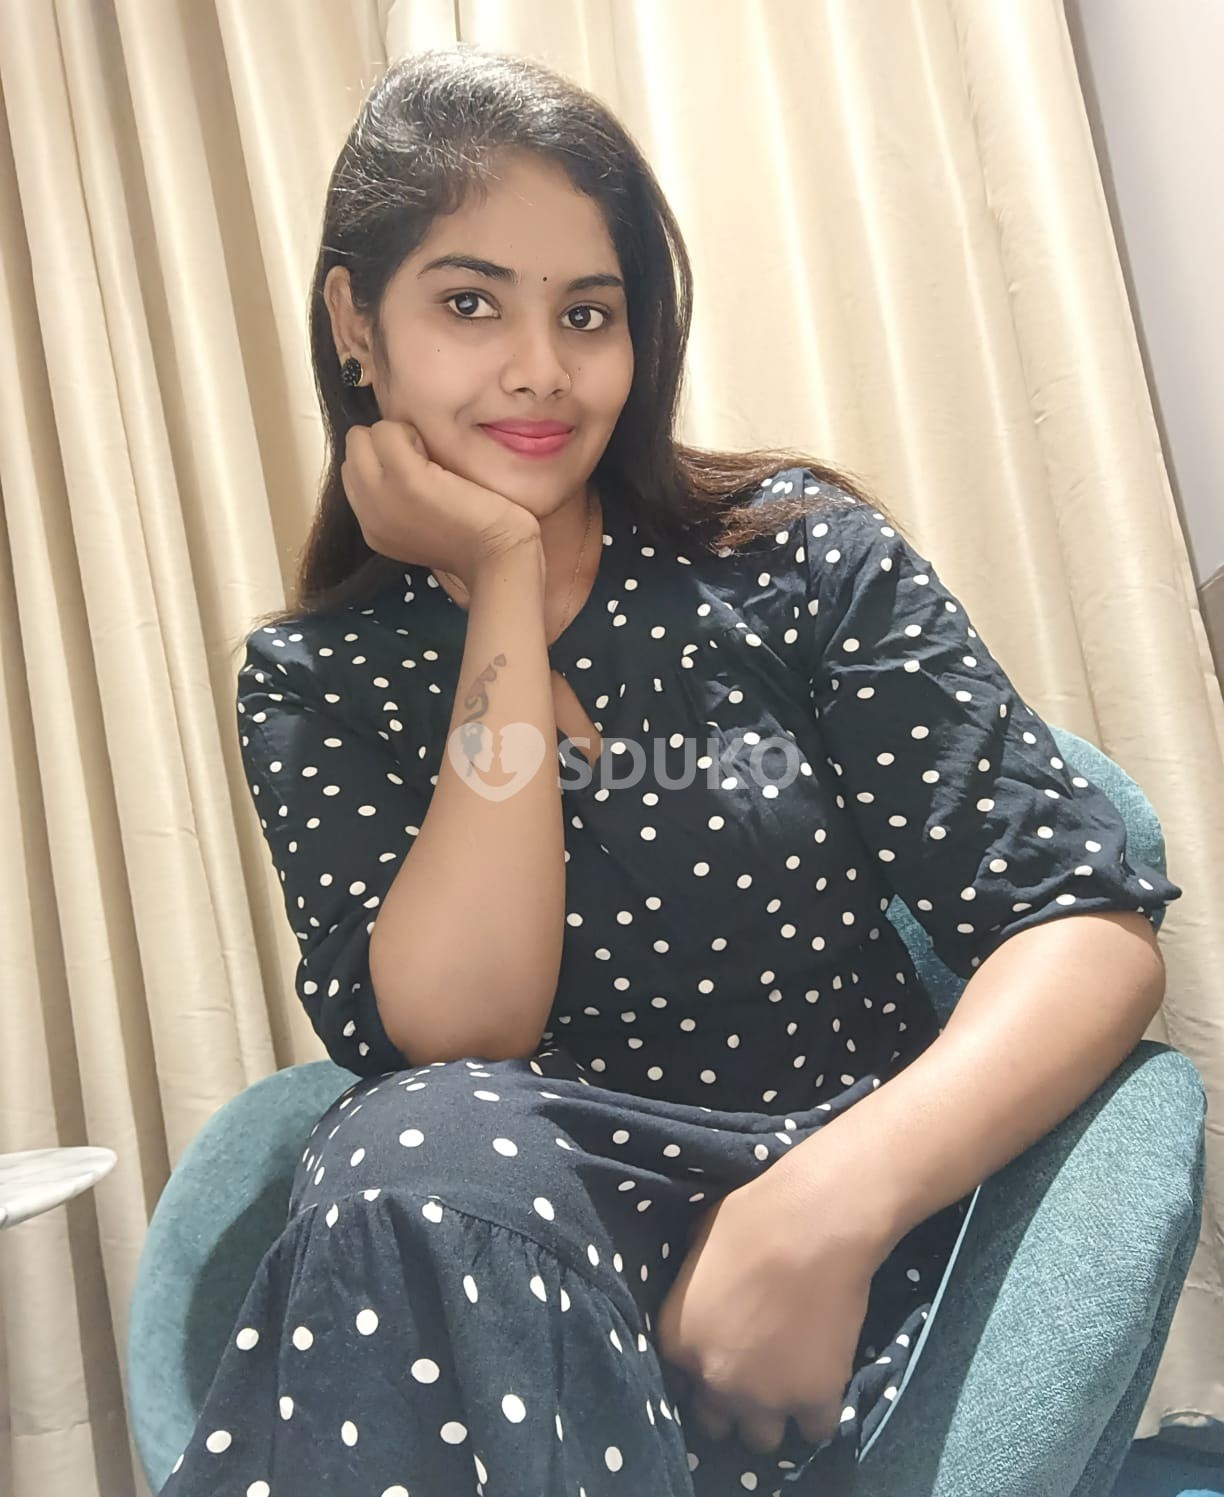 Bhiwandi the most demanded Vvip genuine High profile college girls available for doorstep incall outcall full safe and s